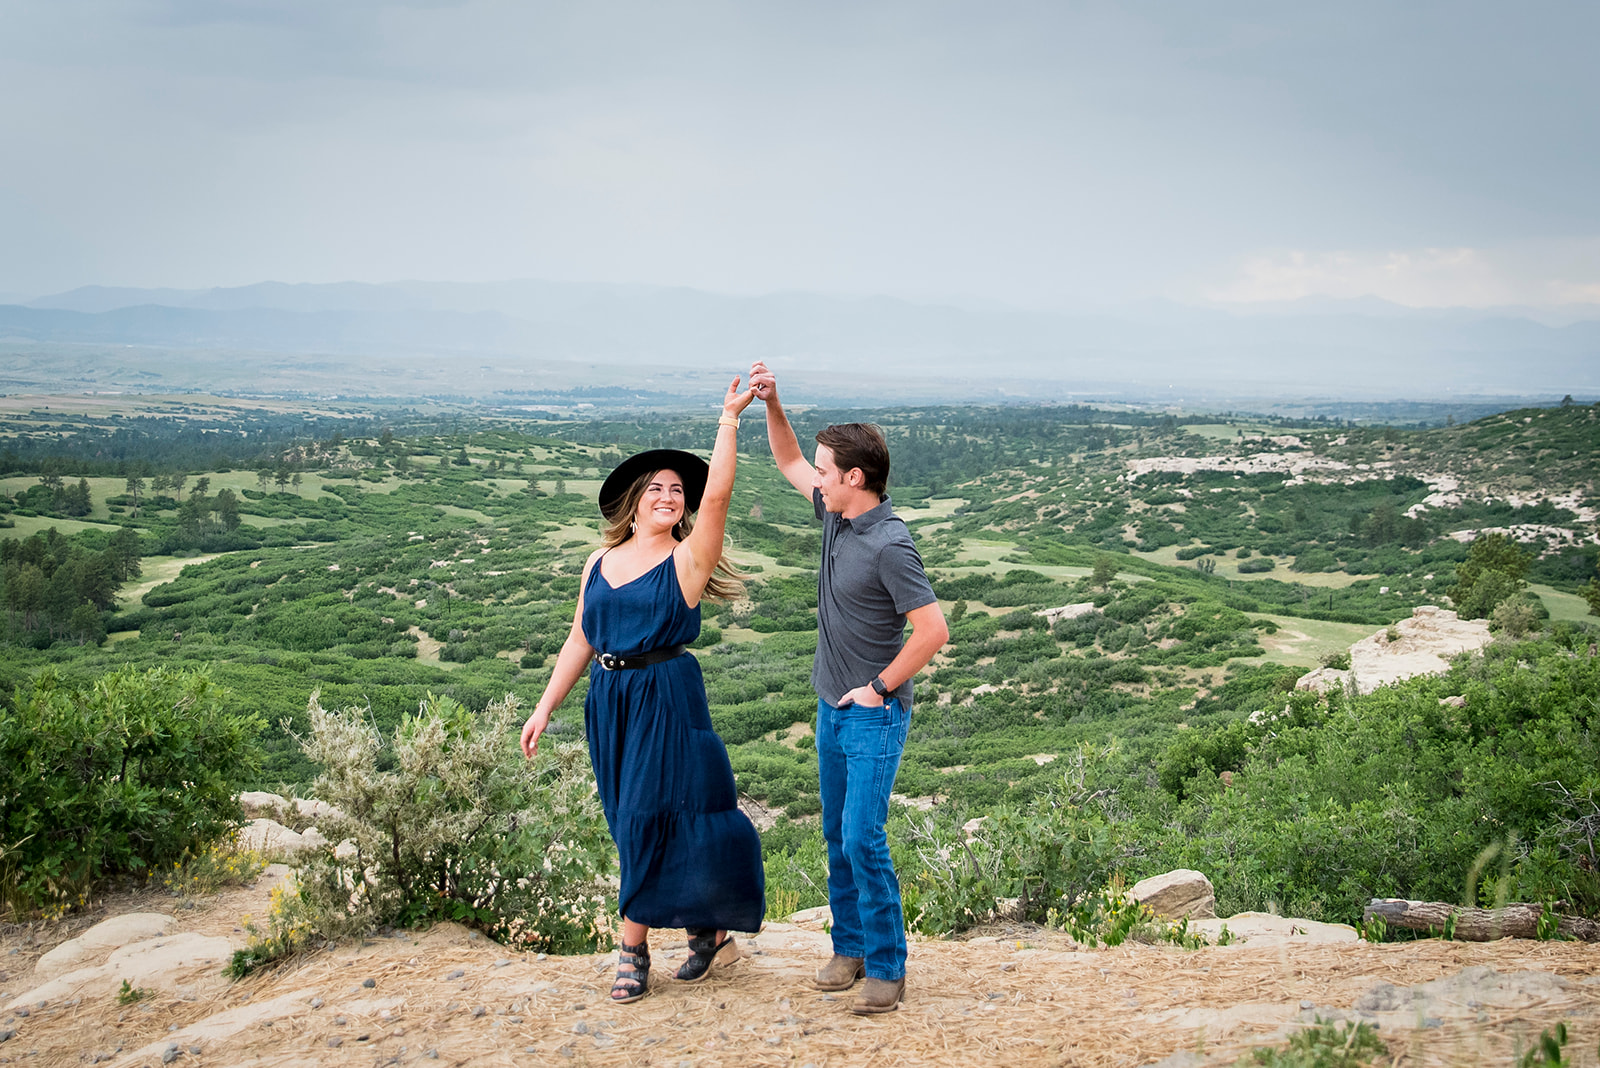 Couple dances on the edge of a scenic overlook as man twirls woman.